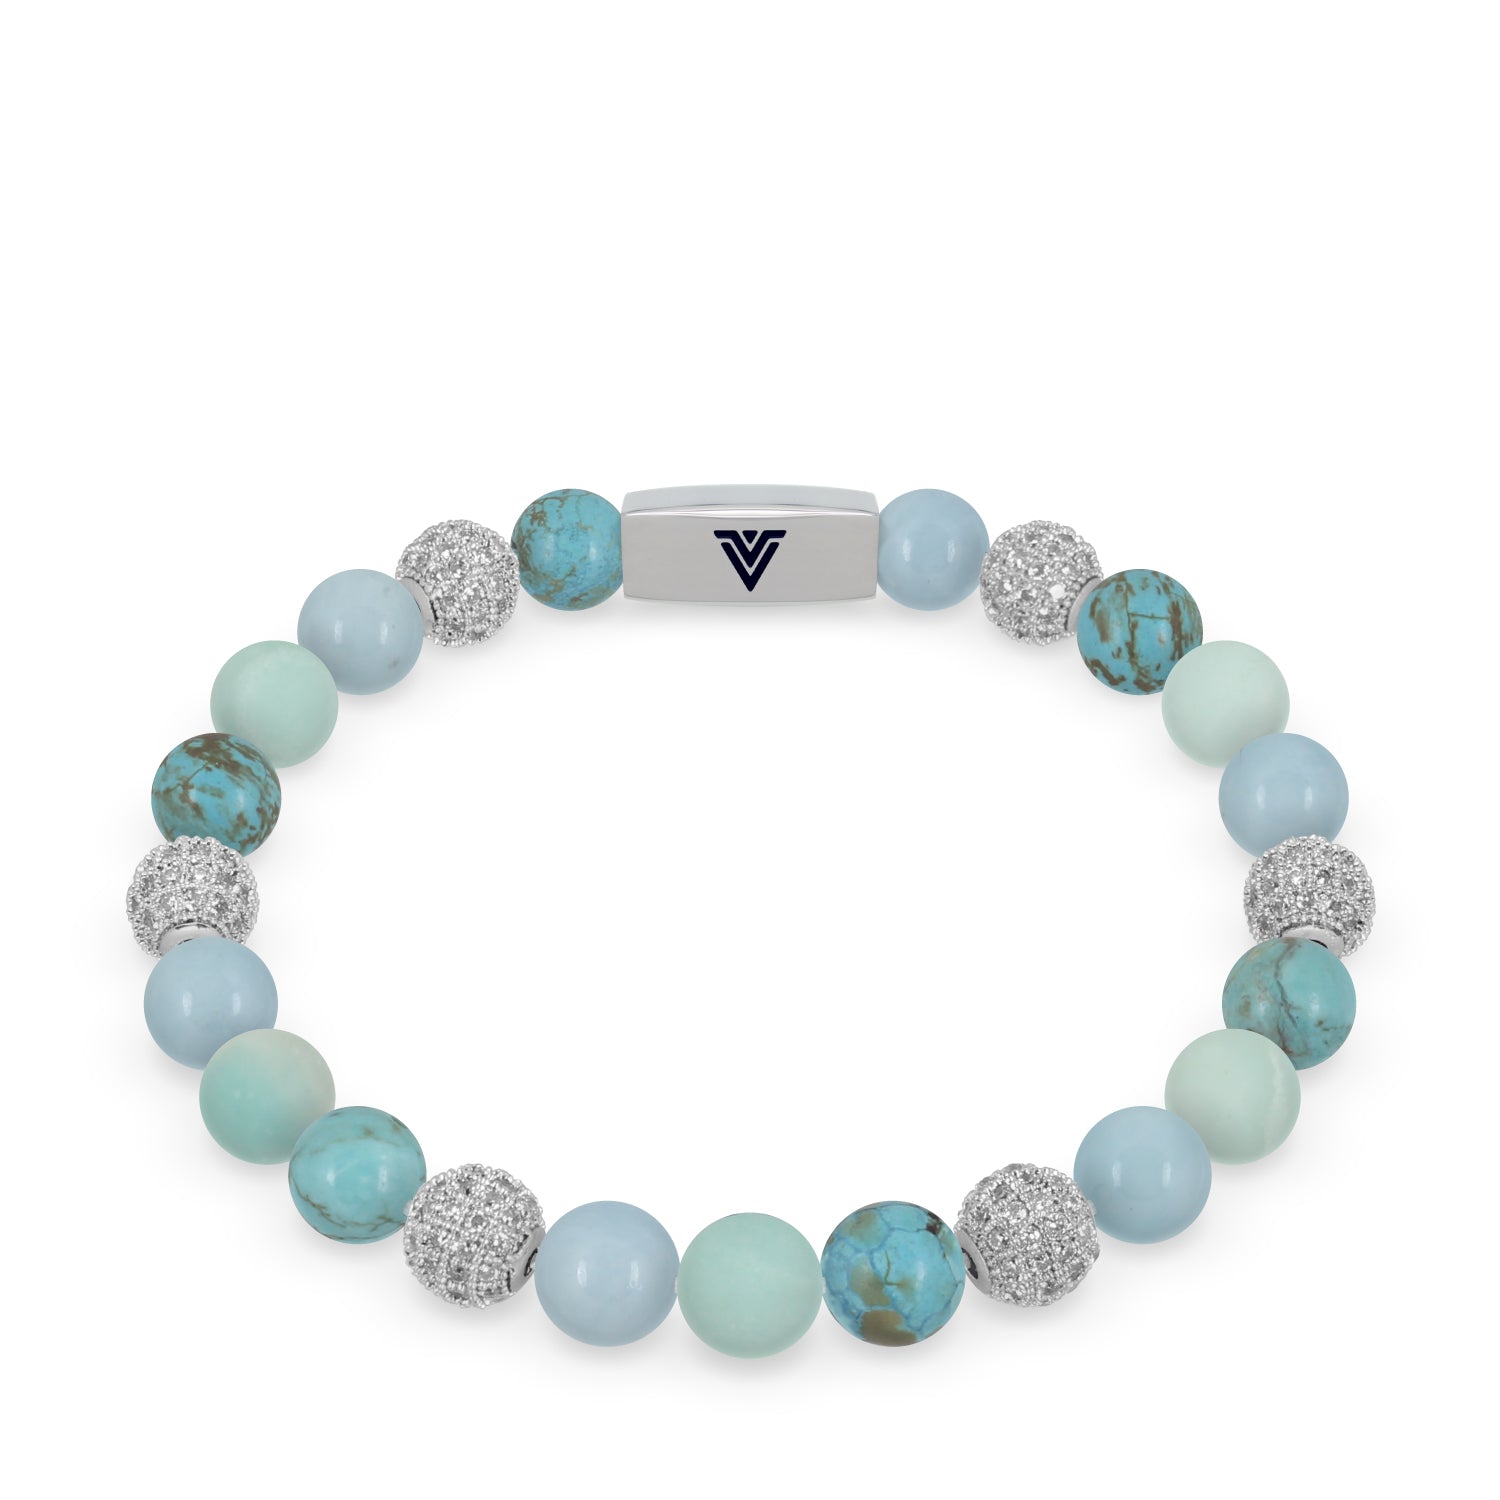 Front view of an 8mm Turquoise Sirius beaded stretch bracelet featuring Turquoise, Silver Pave, Aquamarine, & Matte Amazonite crystal and silver stainless steel logo bead made by Voltlin